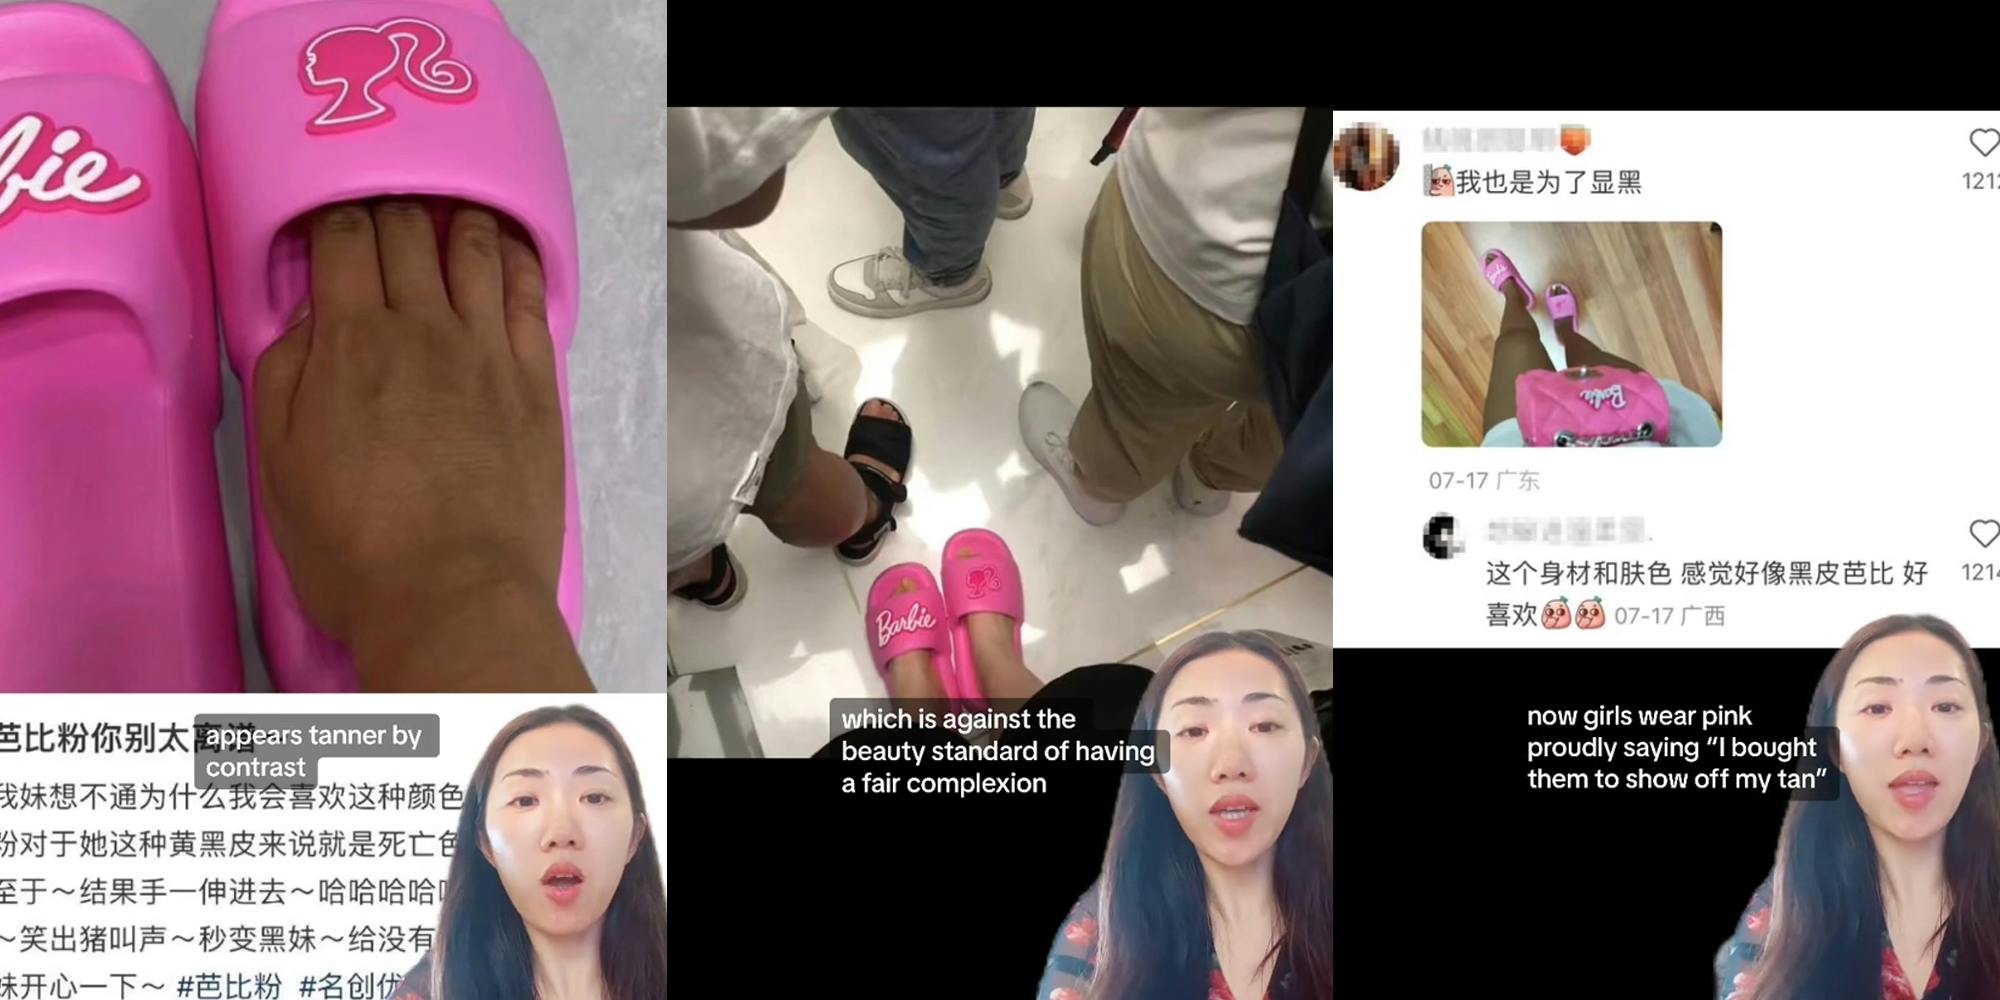 woman greenscreen TikTok over image of barbie shoes with caption "appears tanner by contrast" (l) woman greenscreen TikTok over image of barbie shoes with caption "which is against the beauty standard of having a fair complexion" (c) woman greenscreen TikTok over image of barbie shoes with caption "now girls wear pink proudly saying "I bought them to show off my tan" (r)